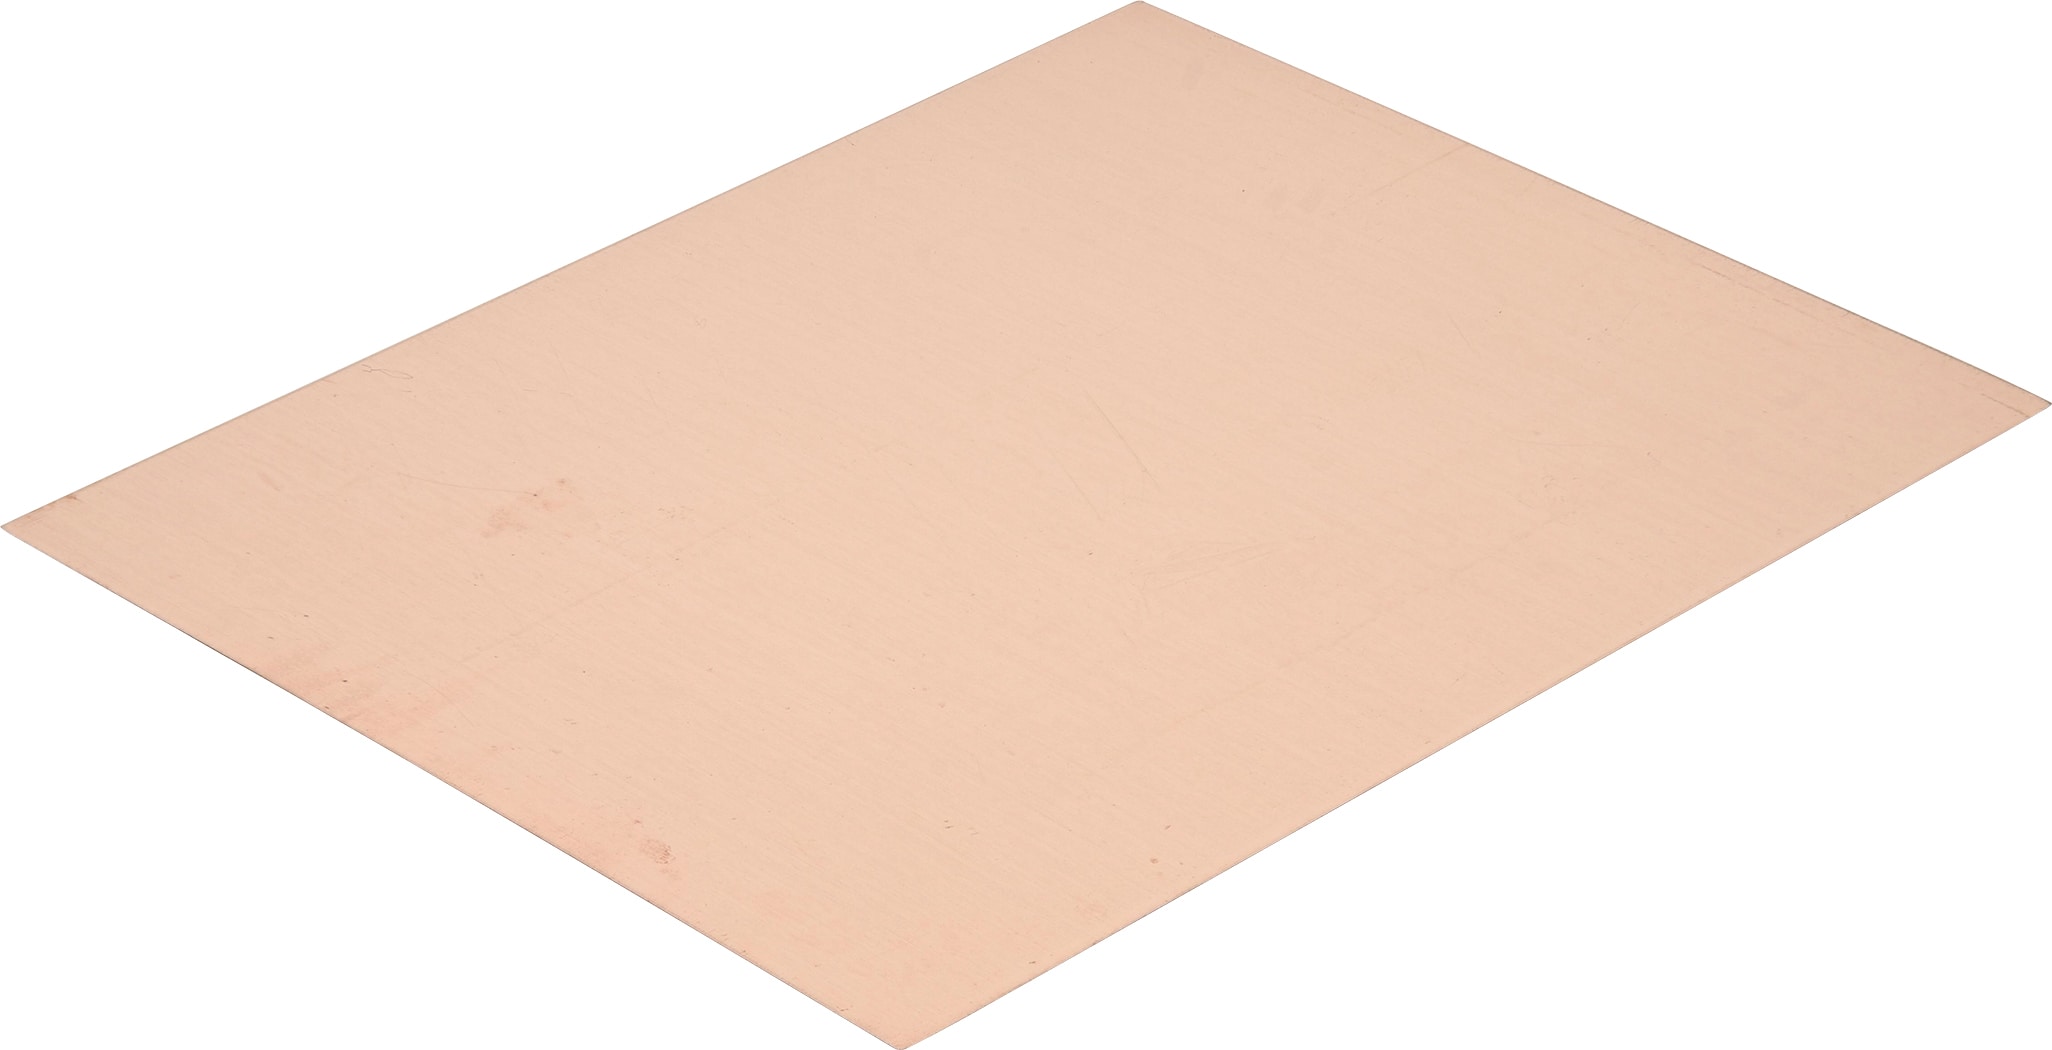 COPPER SHEET PLATE 2 MM thick guillotine cut many sizes. 